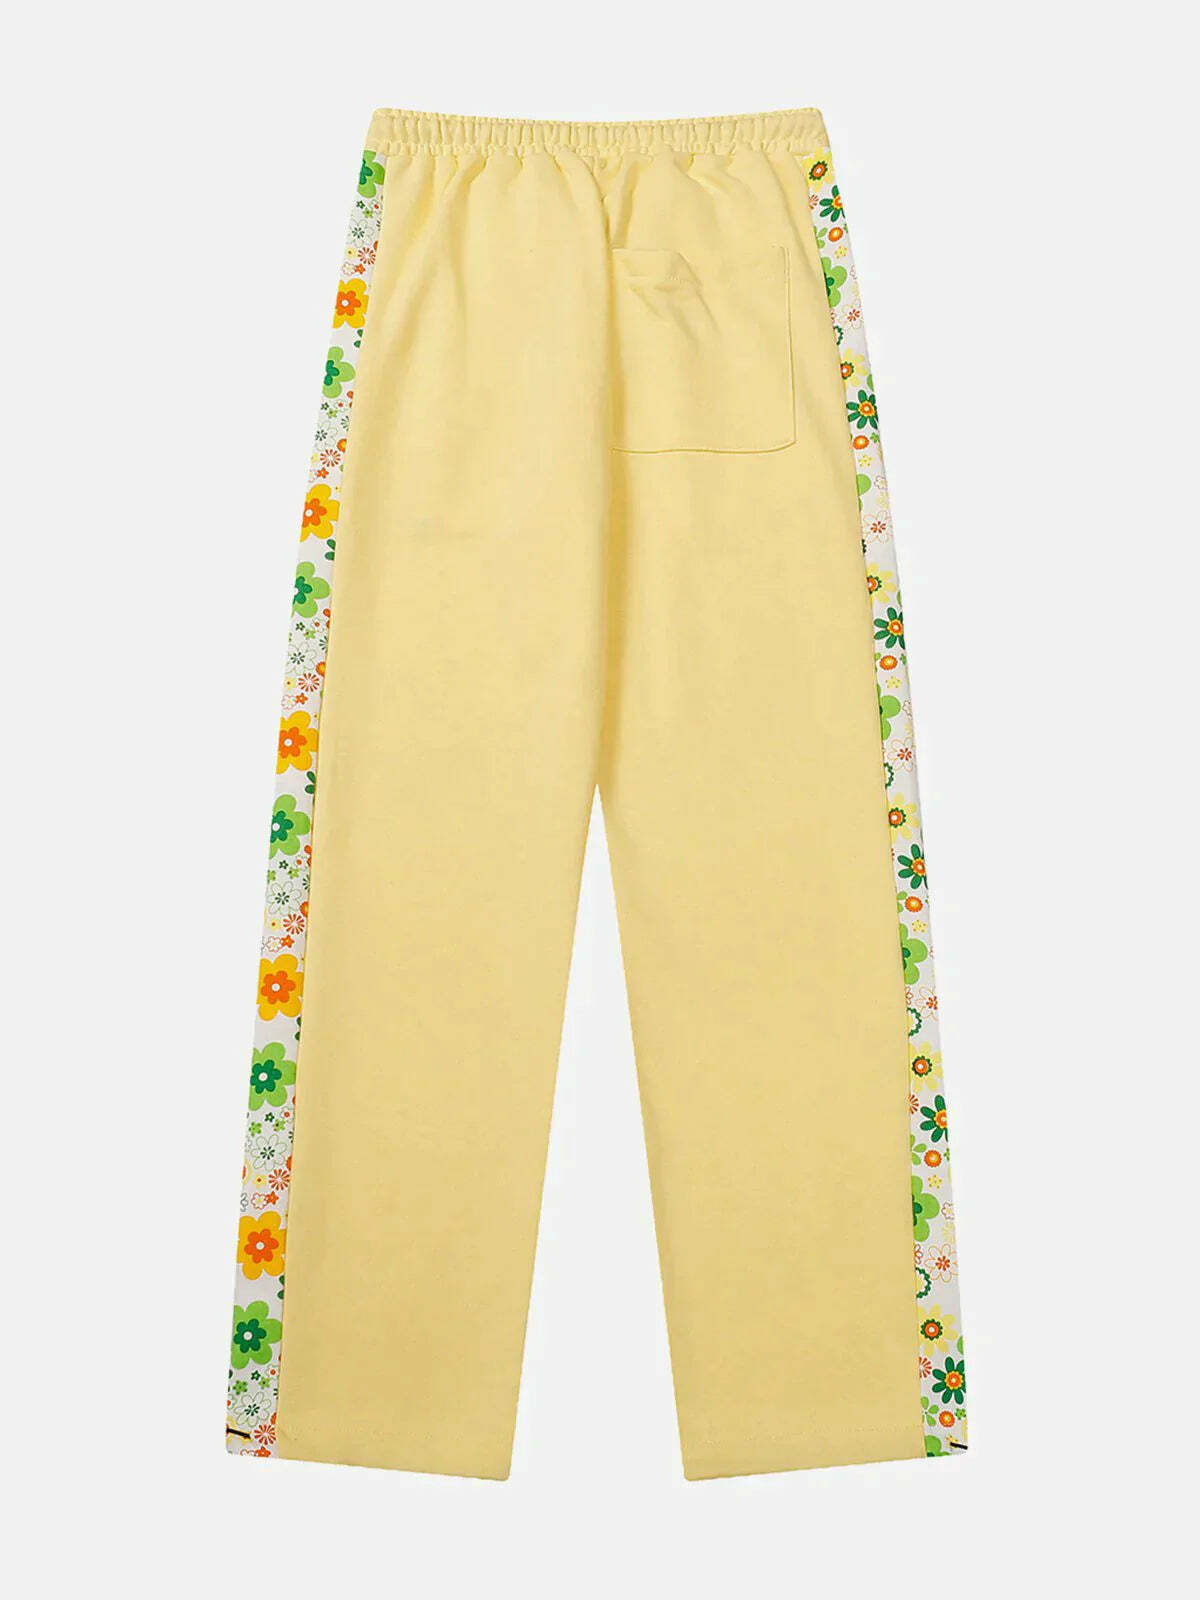 floral side stripe pants casual chic & vibrant 1007